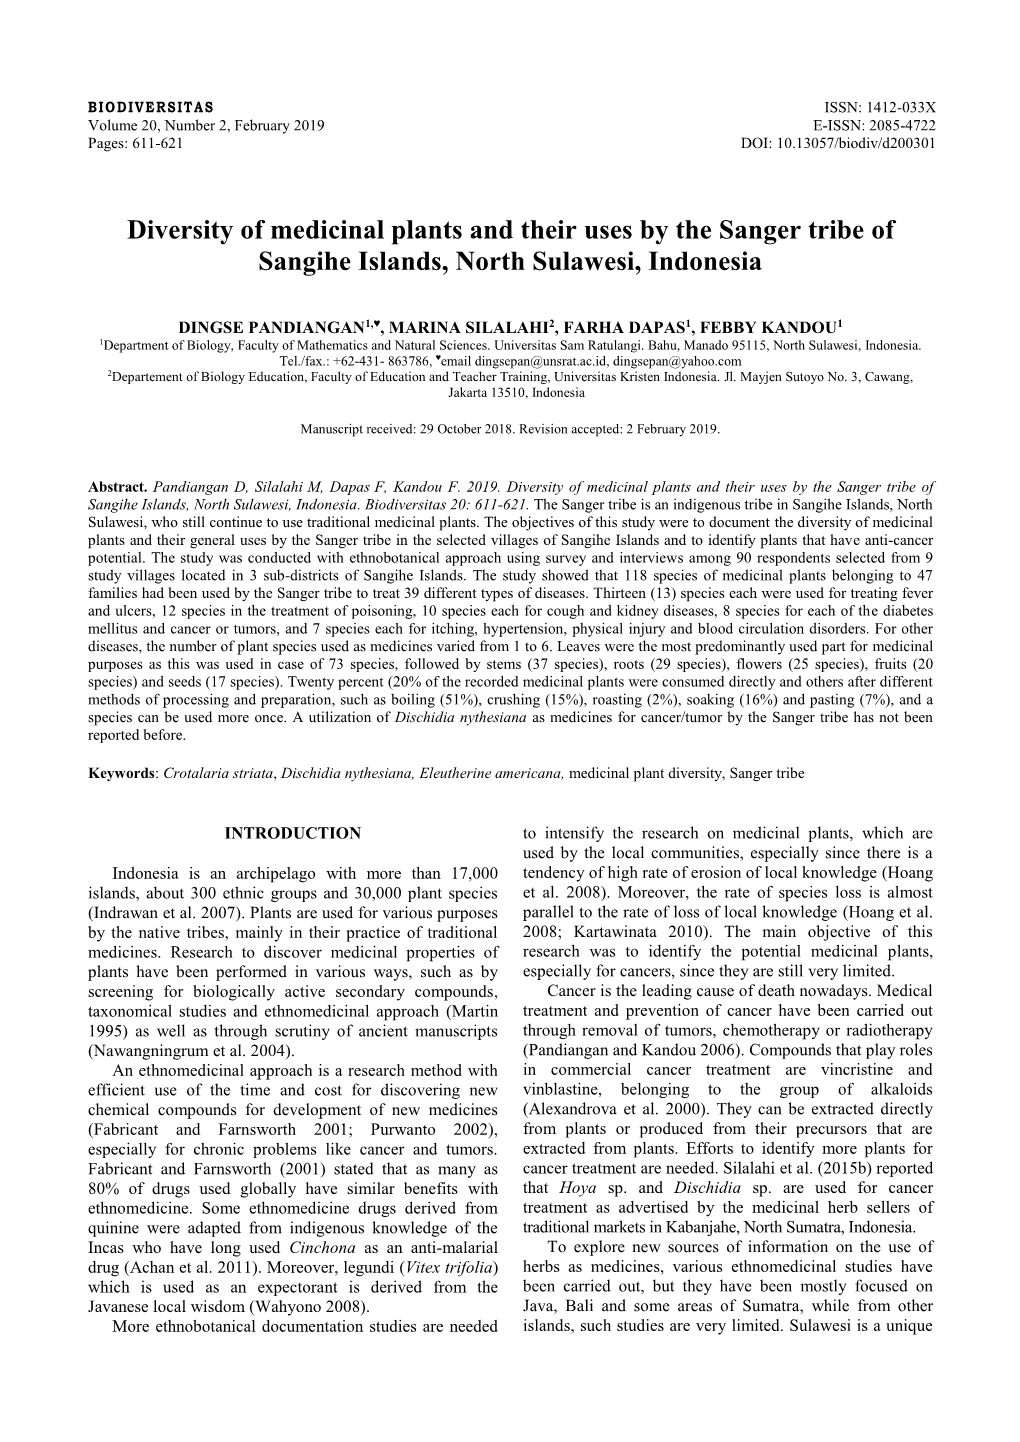 Diversity of Medicinal Plants and Their Uses by the Sanger Tribe of Sangihe Islands, North Sulawesi, Indonesia